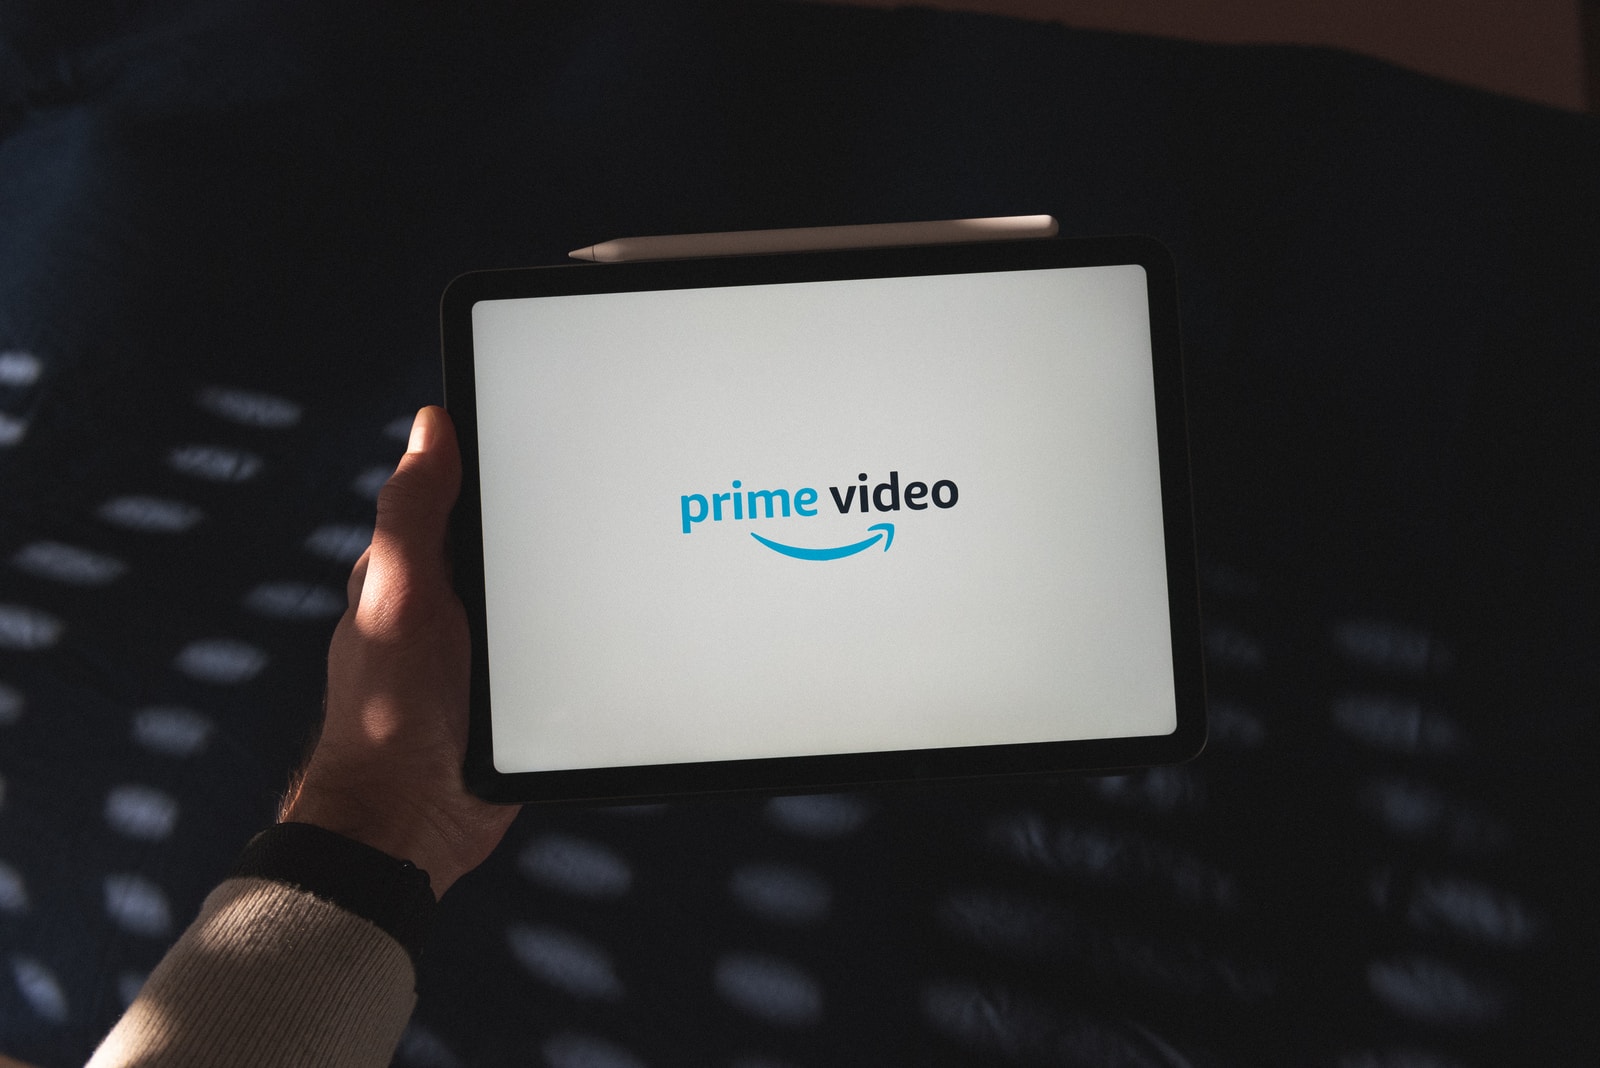 How many devices can be connected with Amazon Prime video?